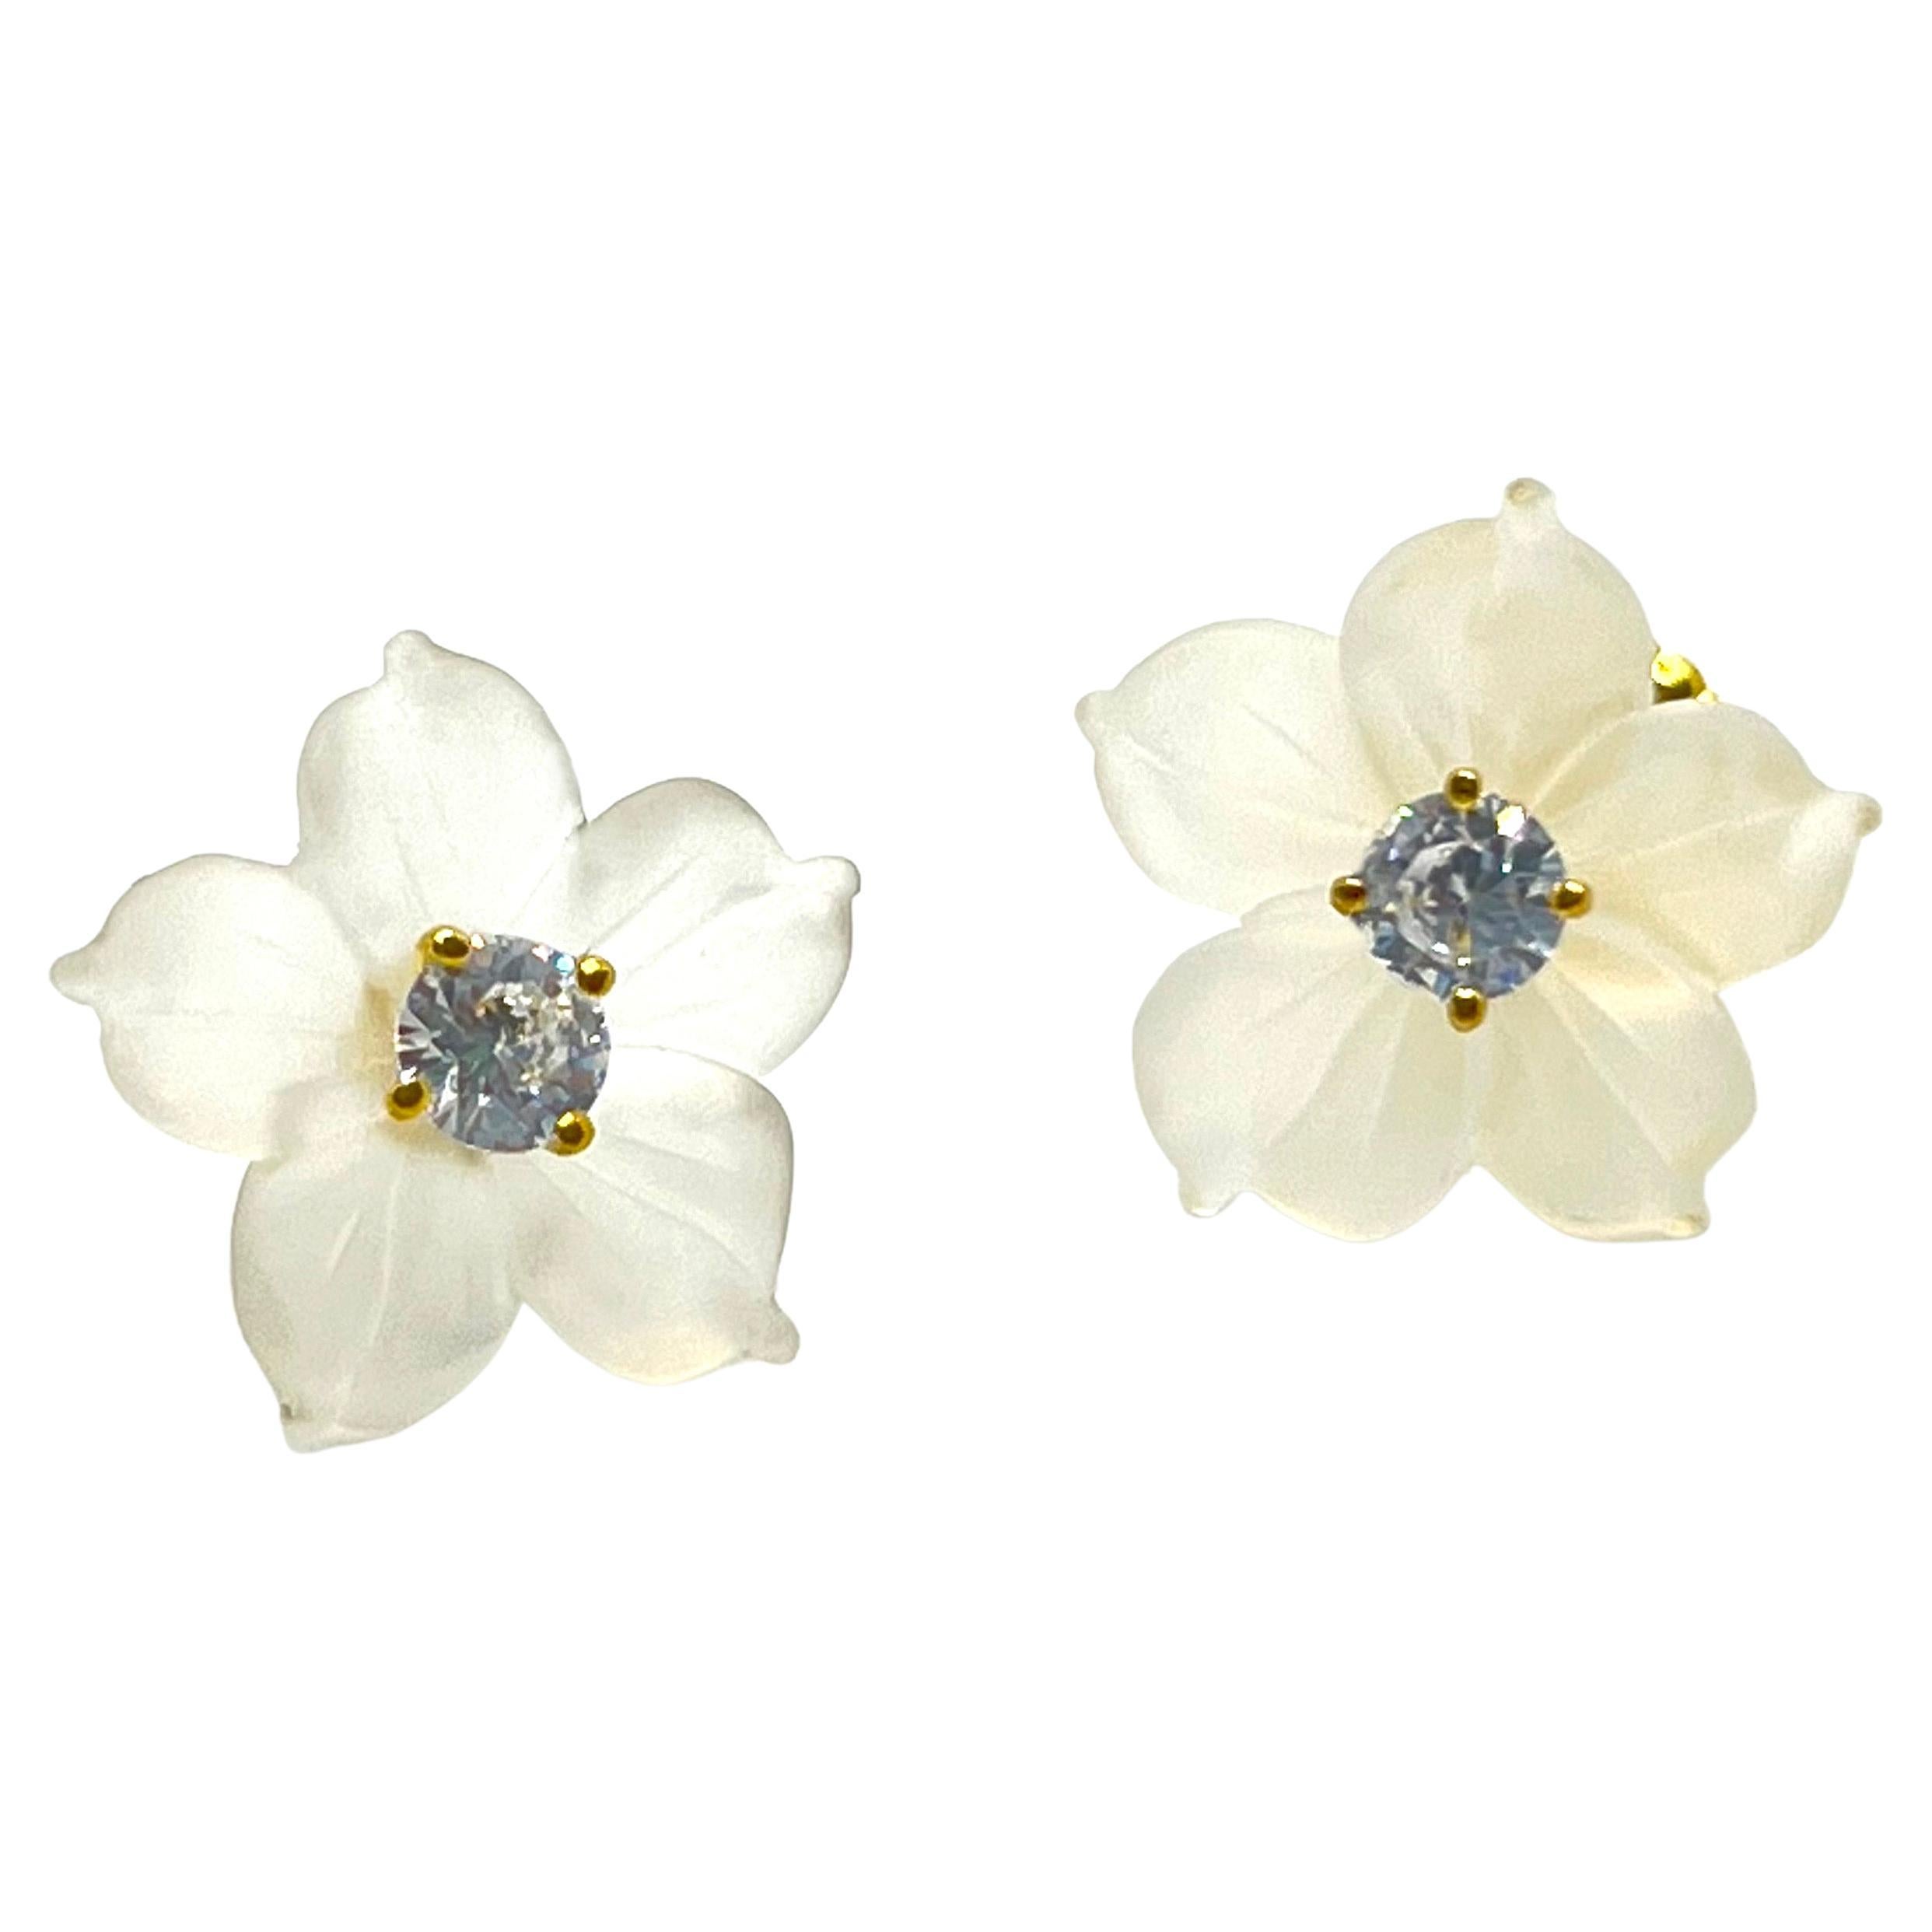 14mm Carved Frosted Quartz Flower Vermeil Earrings For Sale